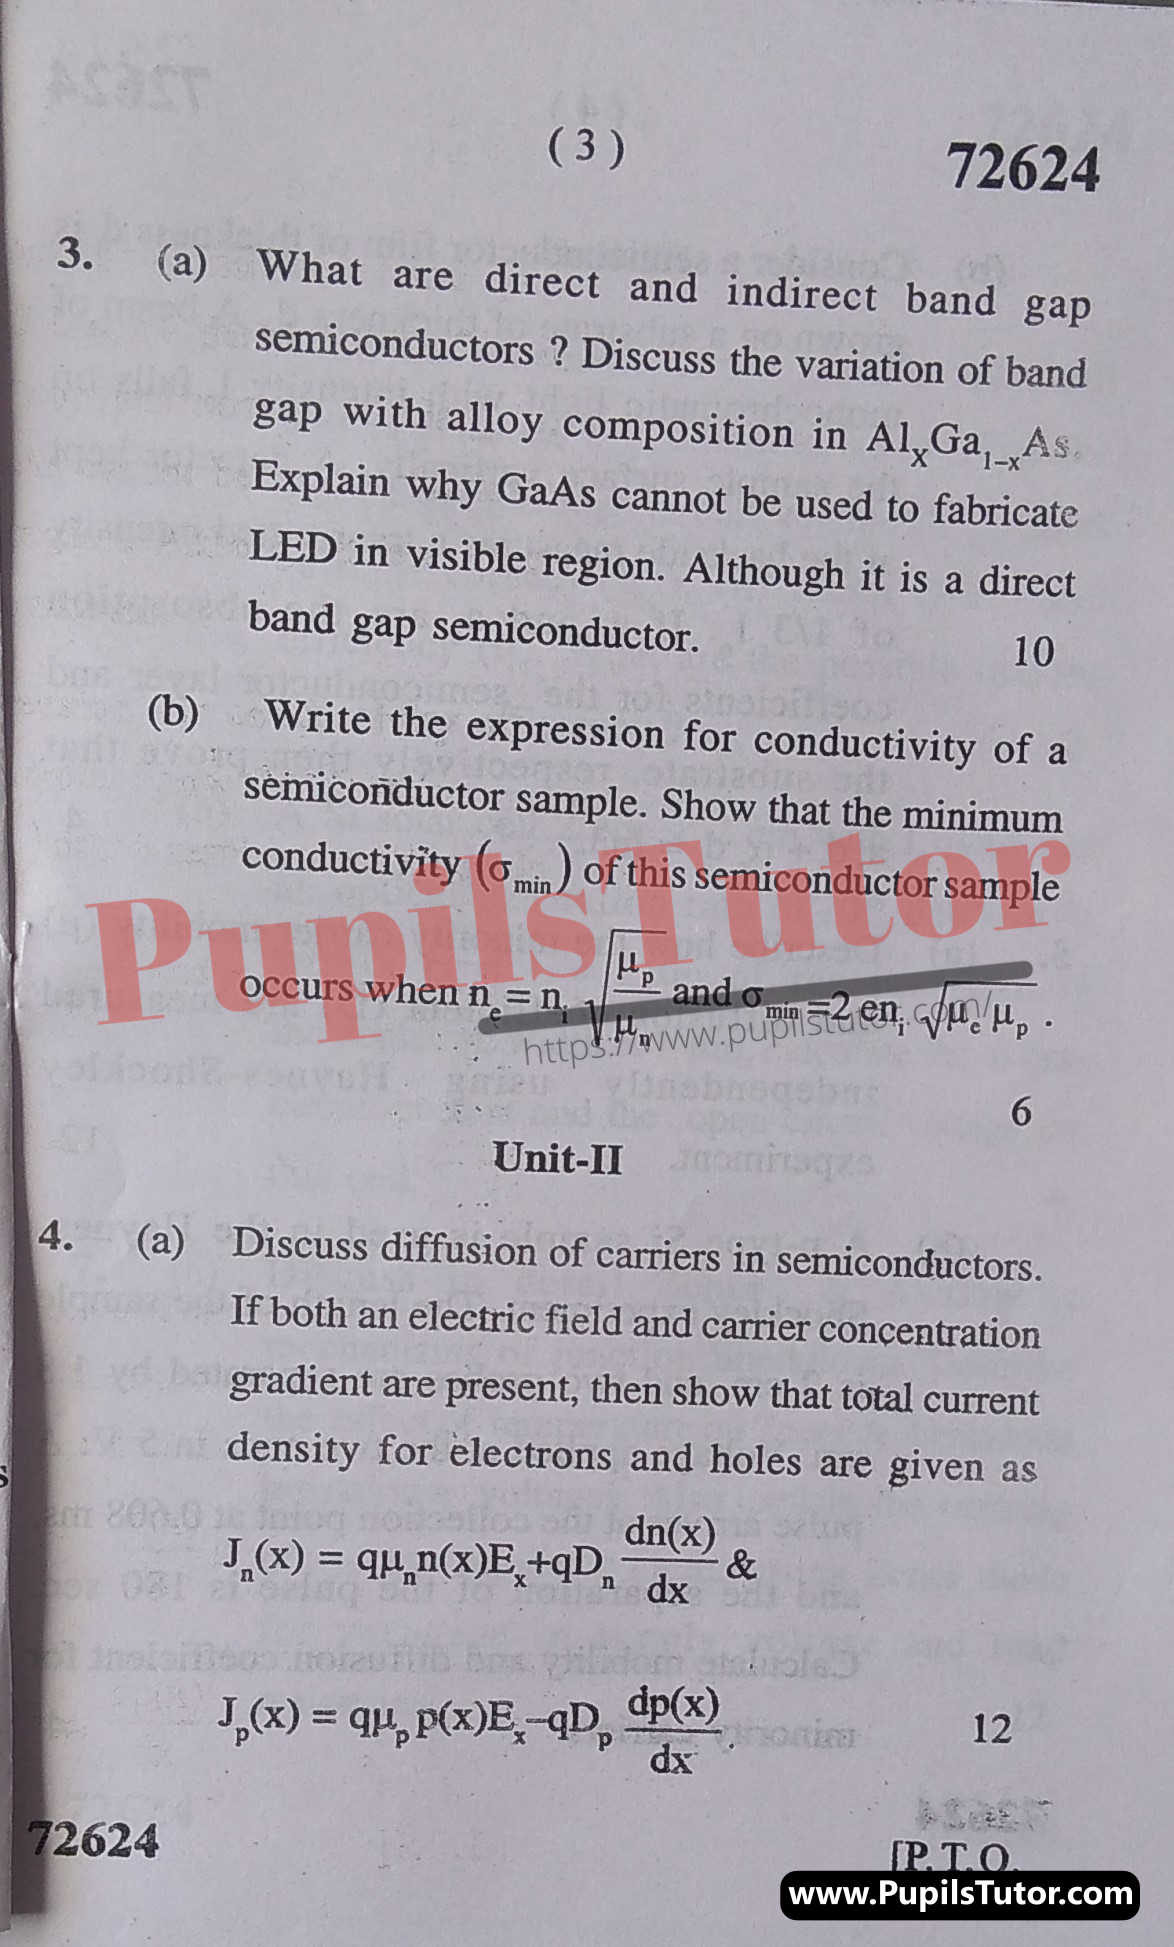 Free Download PDF Of M.D. University M.Sc. [Physics] First Semester Latest Question Paper For Physics Of Electronic Devices Subject (Page 3) - https://www.pupilstutor.com